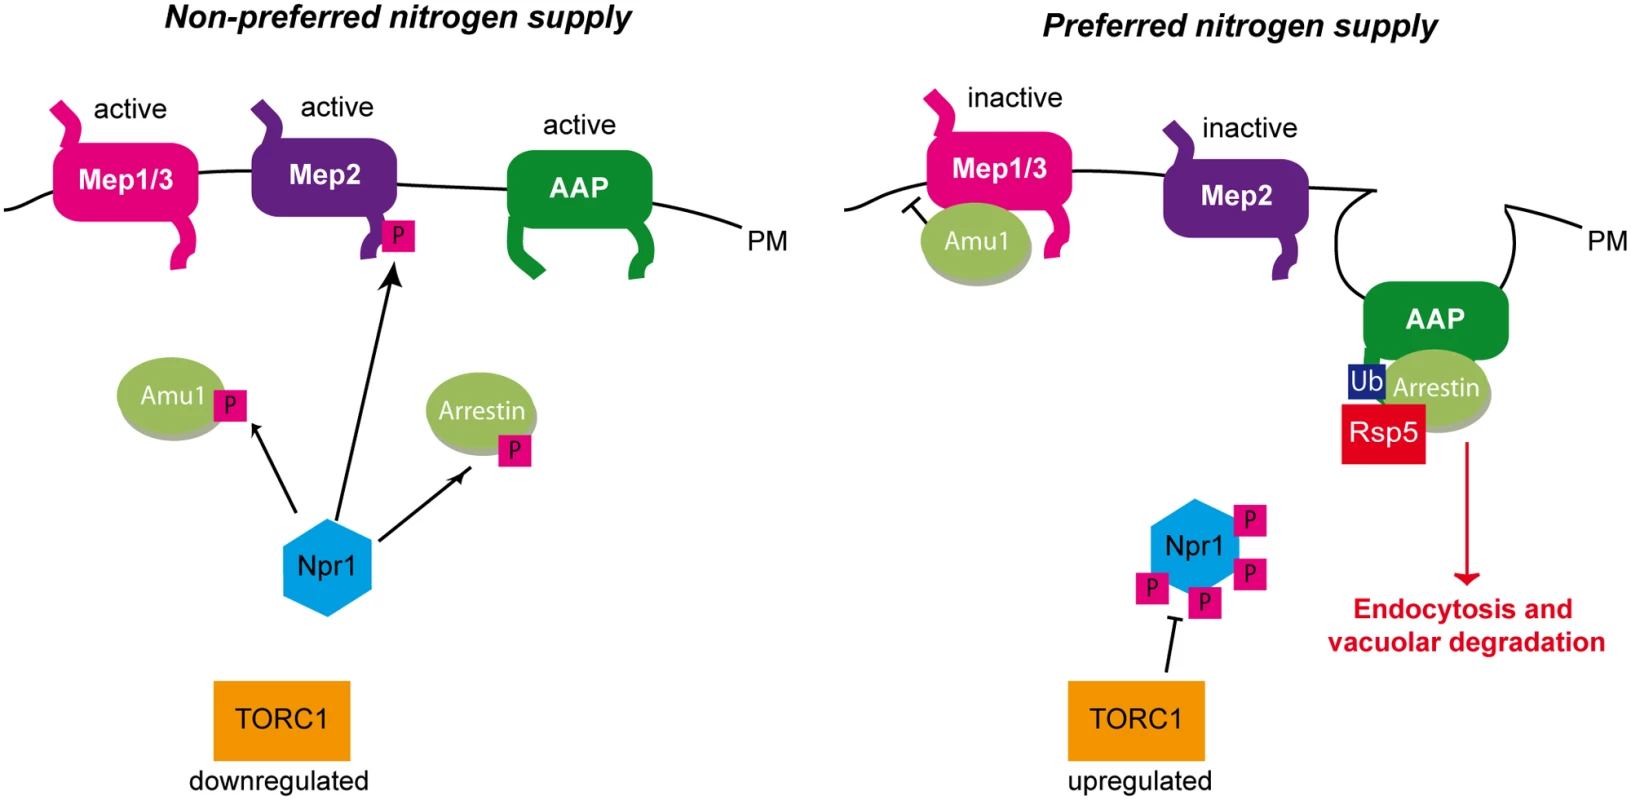 Three different strategies enable the TORC1-pathway to regulate plasma-membrane transport proteins.